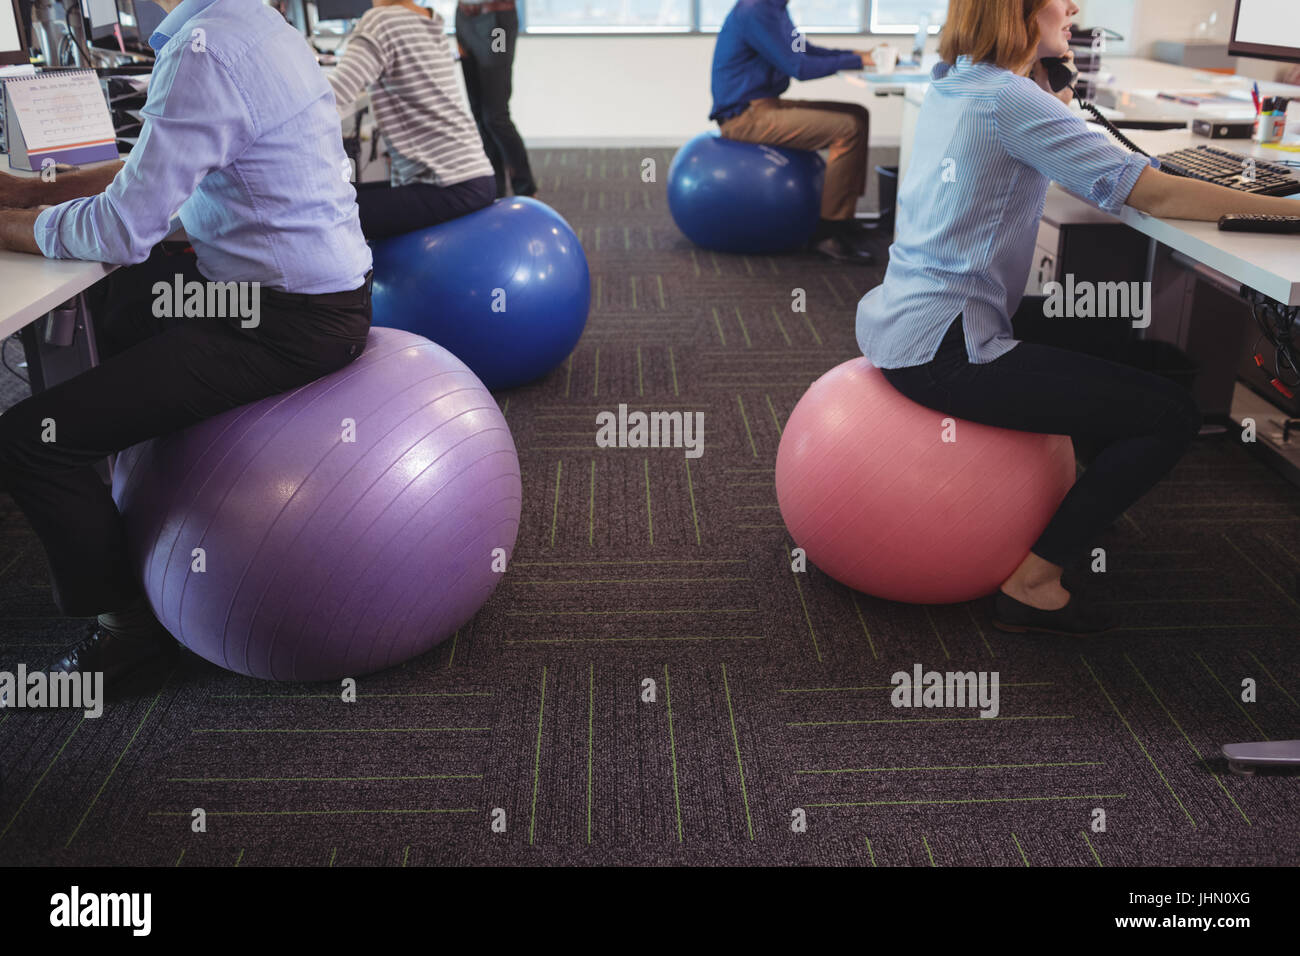 Low Section Of Business People Sitting On Exercise Balls While